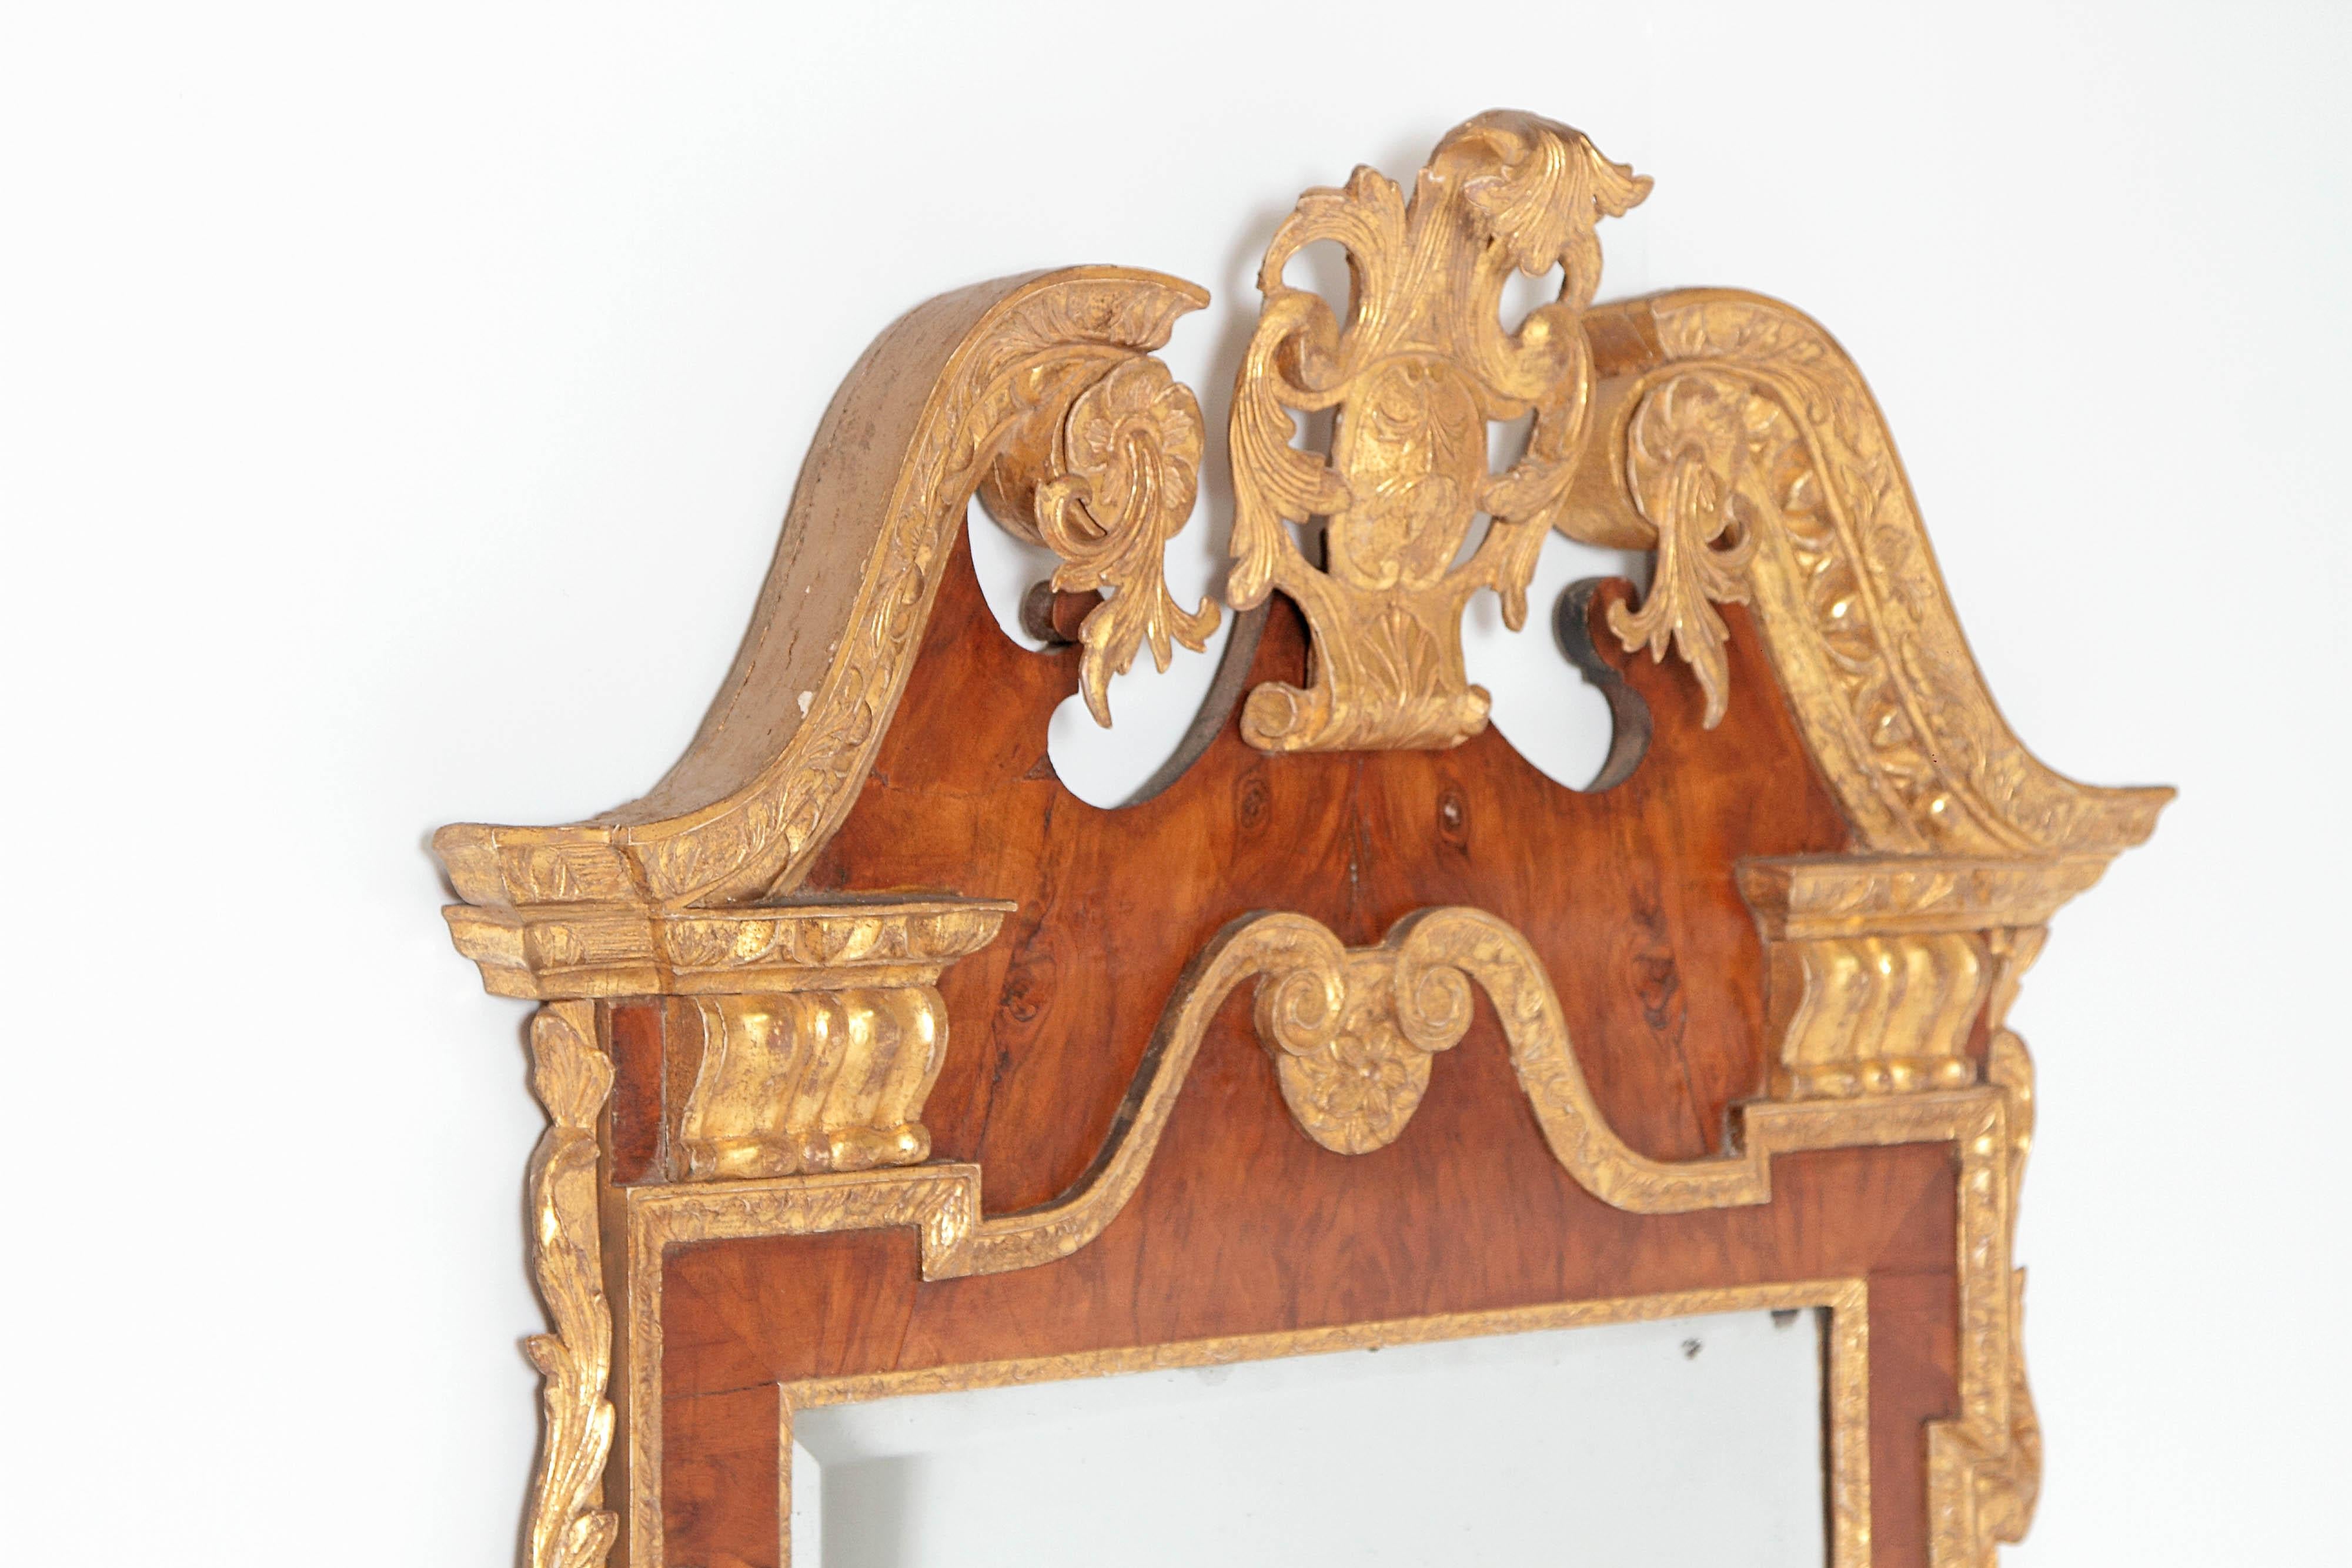 Beveled Period George II Pier Glass with Bookmatched Walnut Veneers